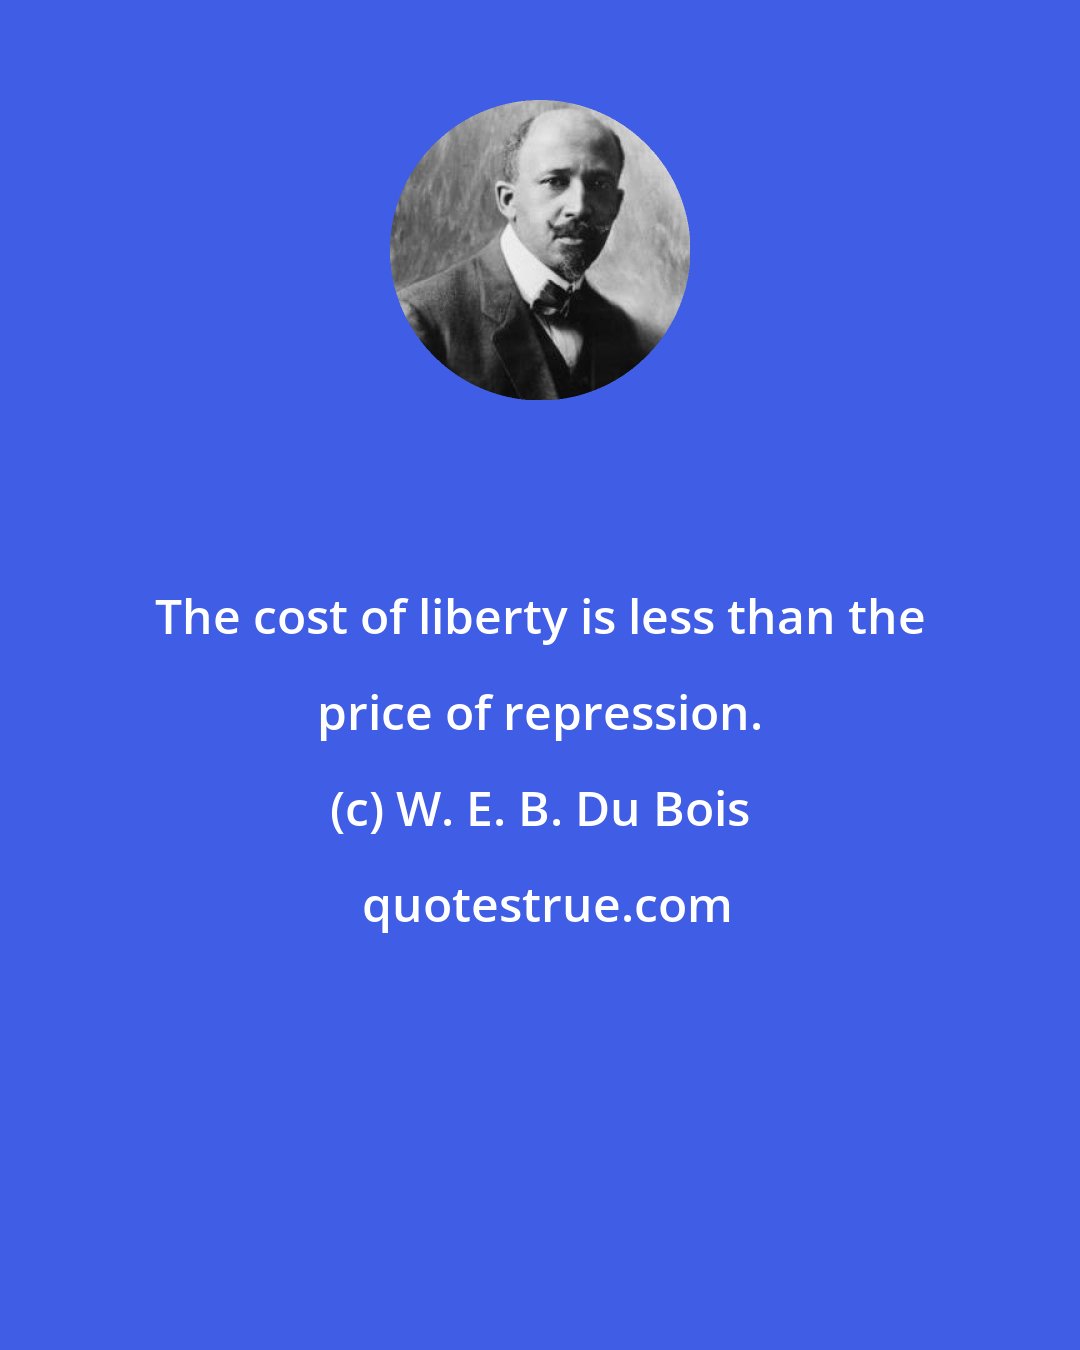 W. E. B. Du Bois: The cost of liberty is less than the price of repression.